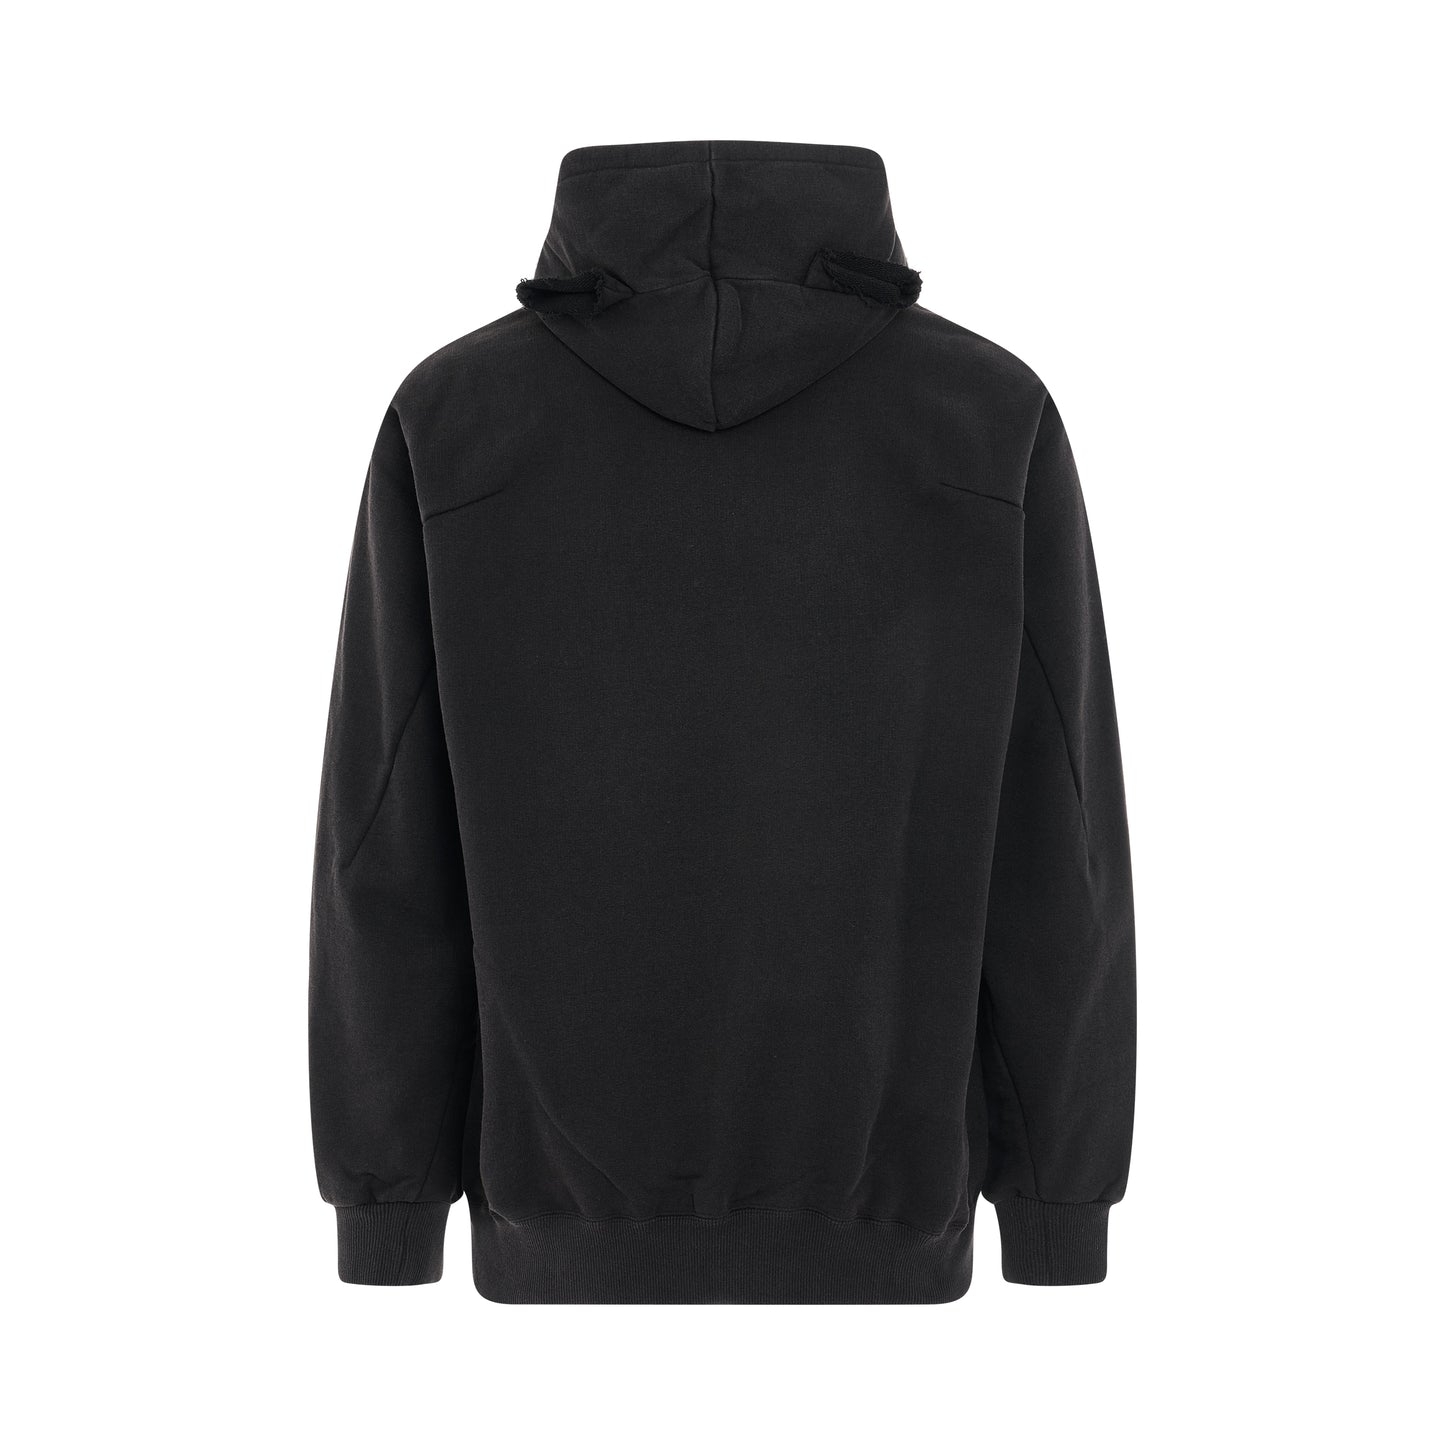 "DOUBLAND" Embroidery Hoodie in Black